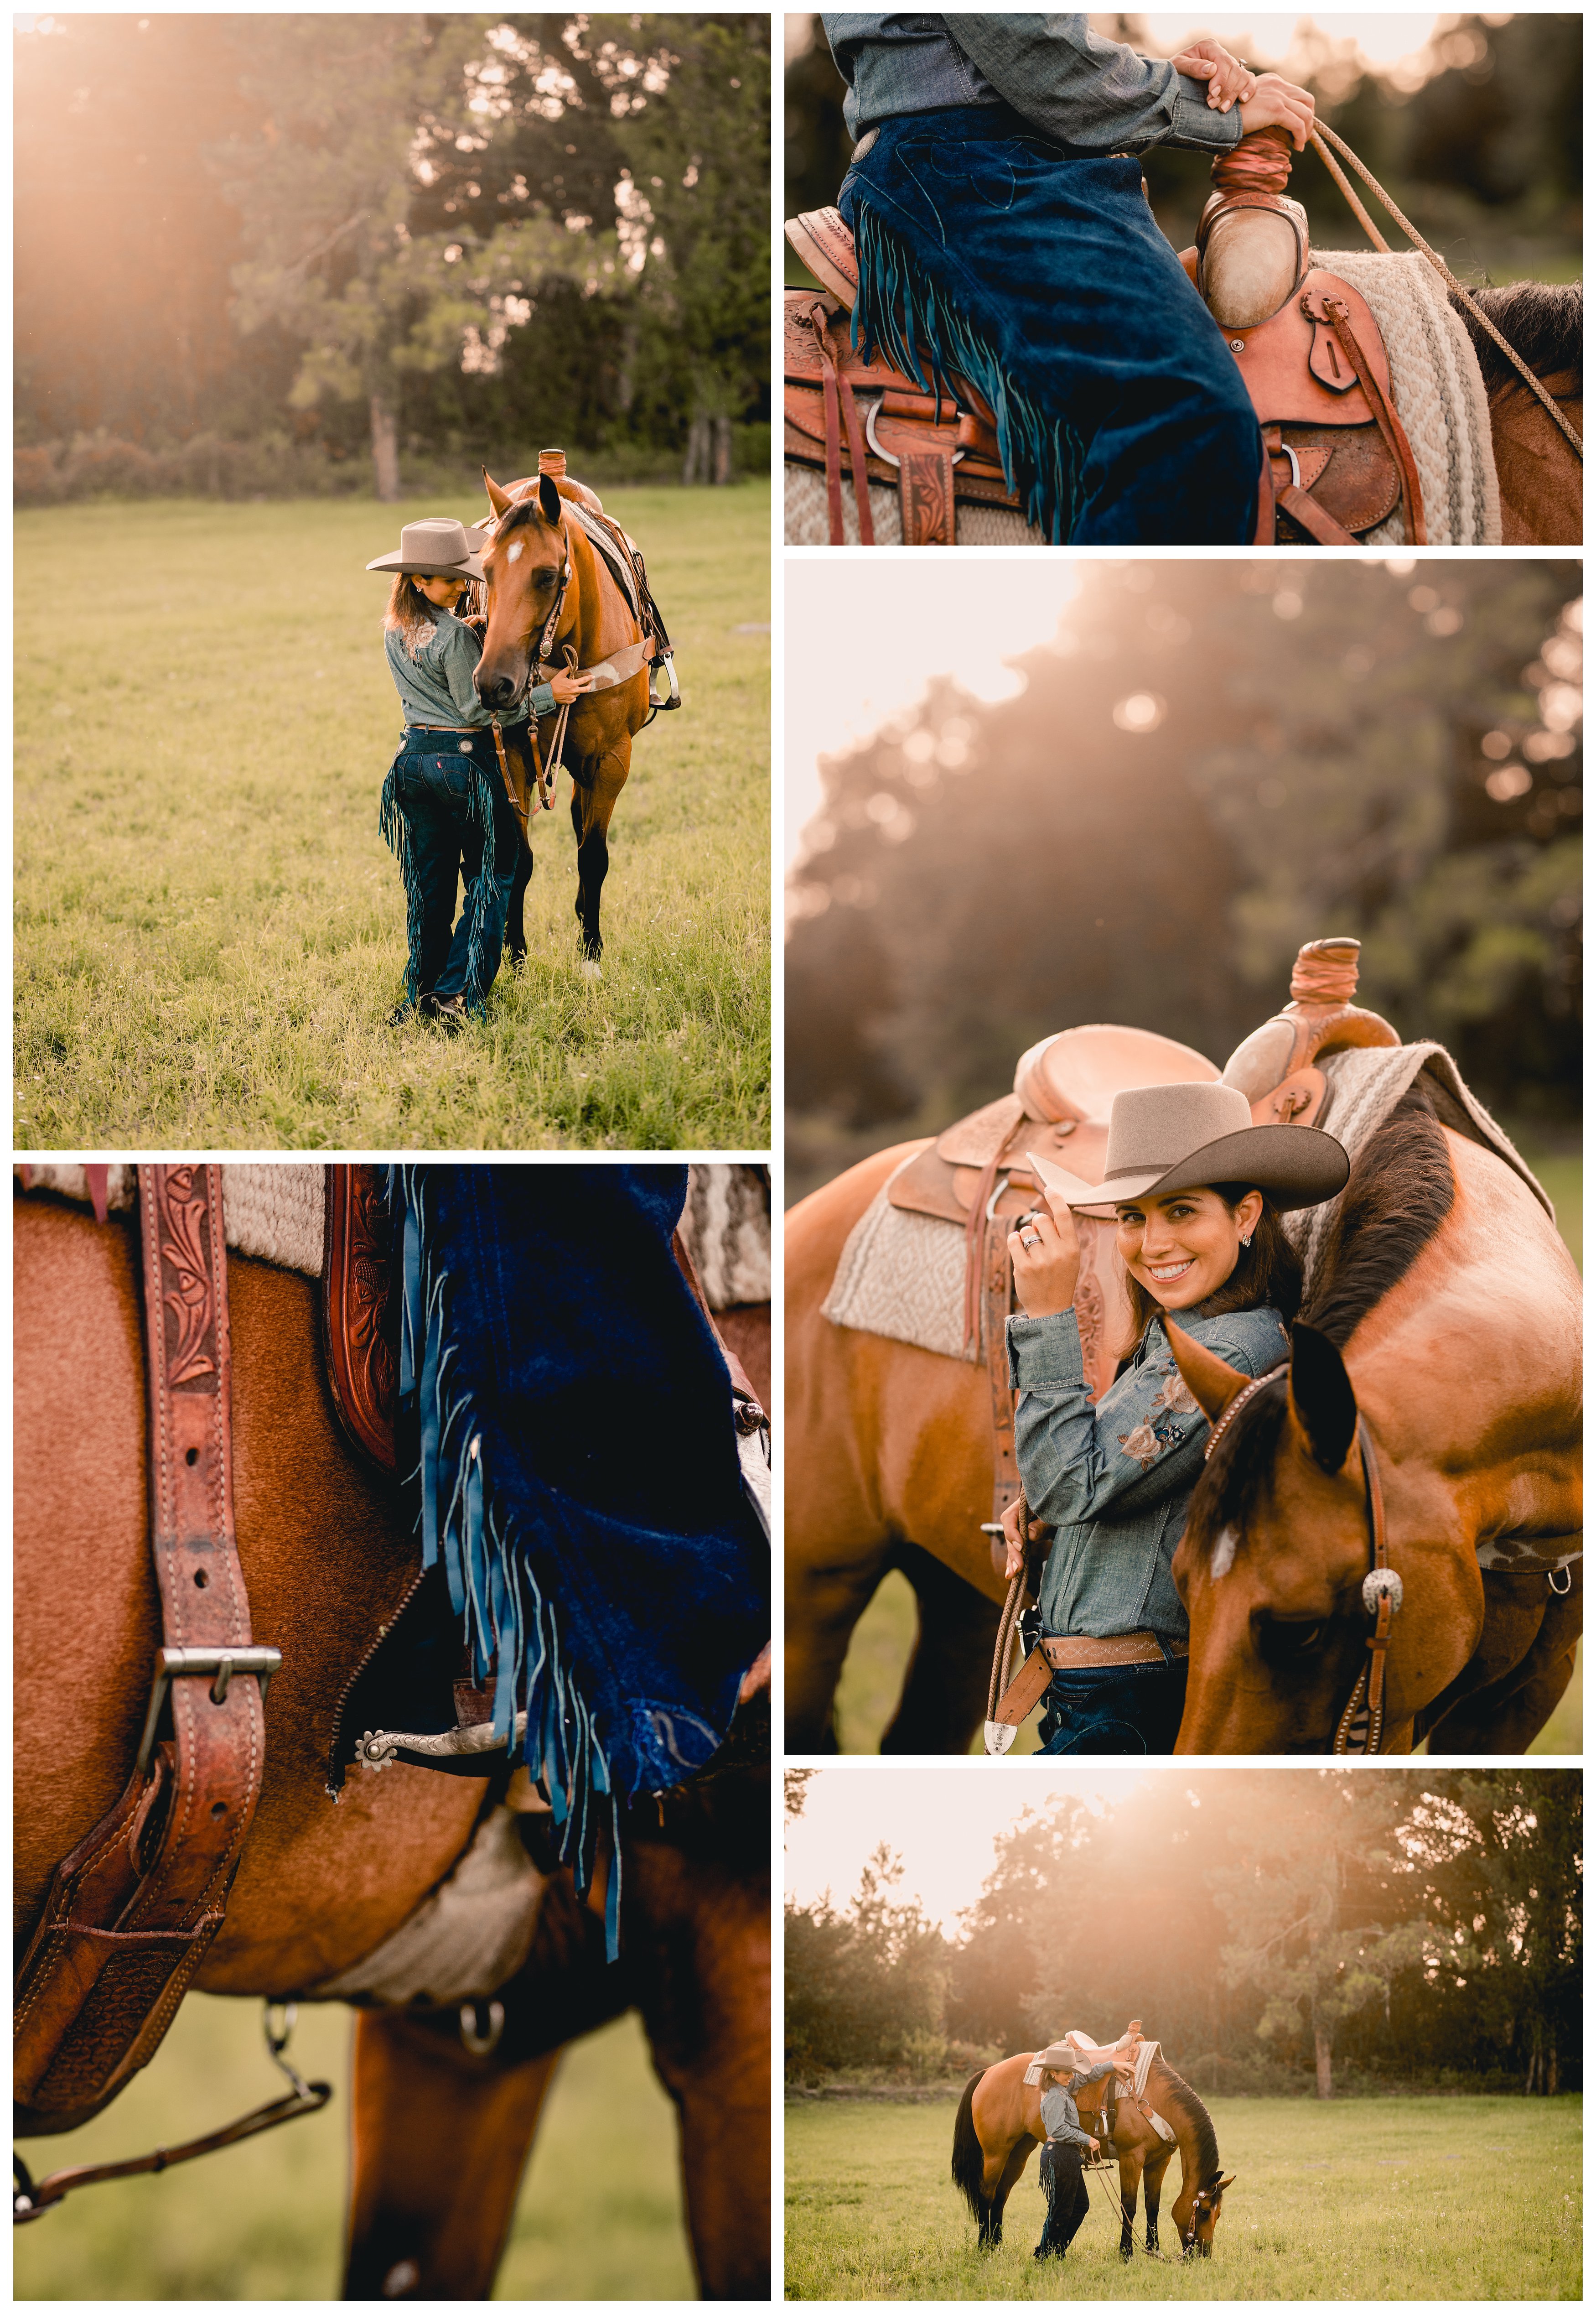 Beautiful golden hour pictures of western rider and horse in Gainesville, FL.